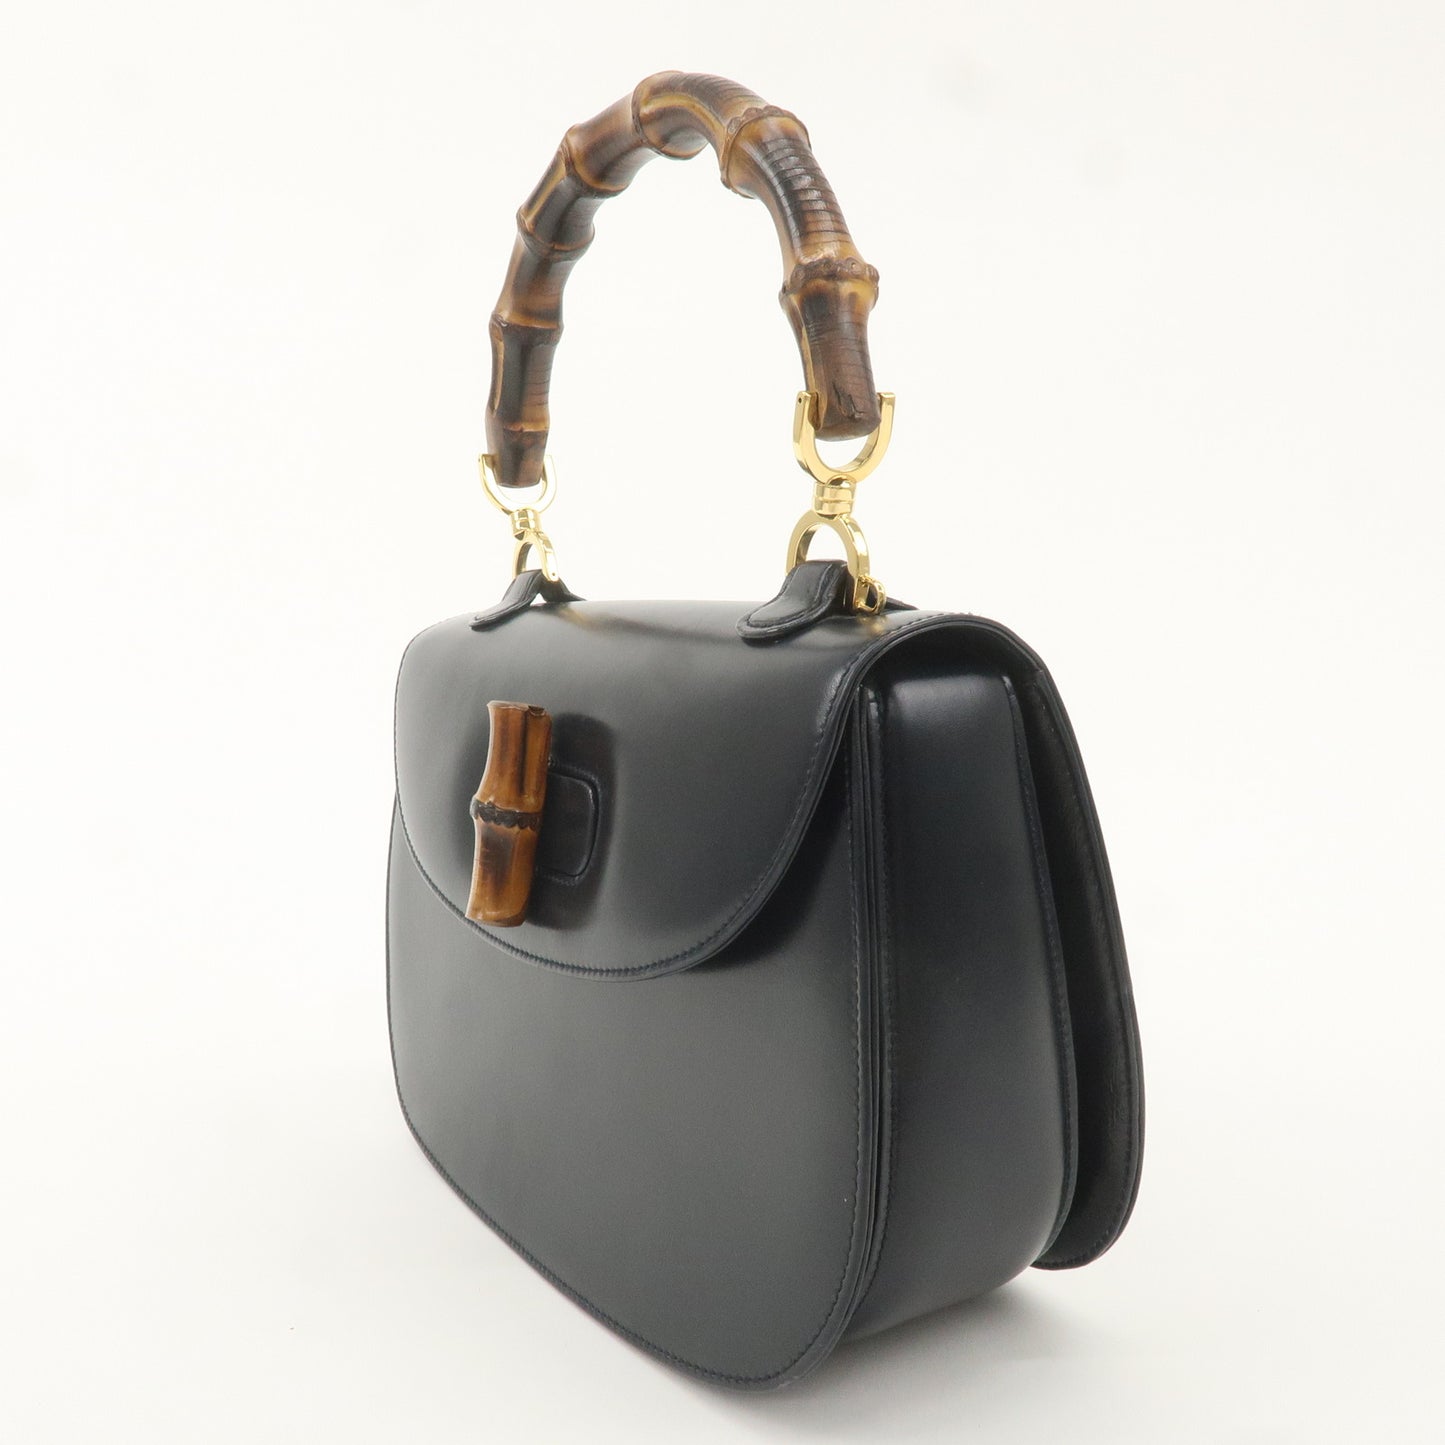 GUCCI Bamboo Leather Hand Bag Black 000.1951.0633